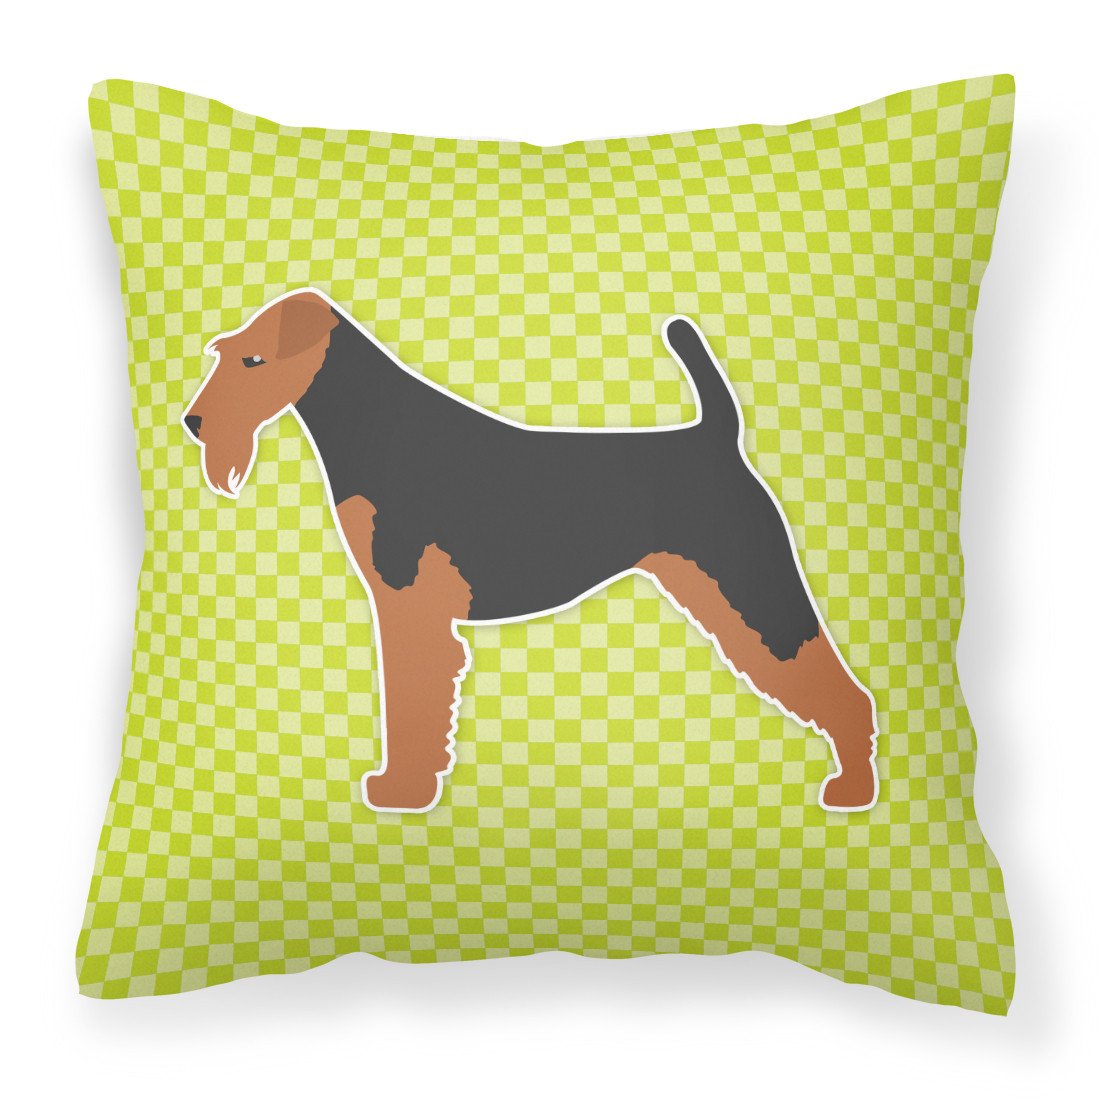 Welsh Terrier Checkerboard Green Fabric Decorative Pillow BB3785PW1818 by Caroline's Treasures